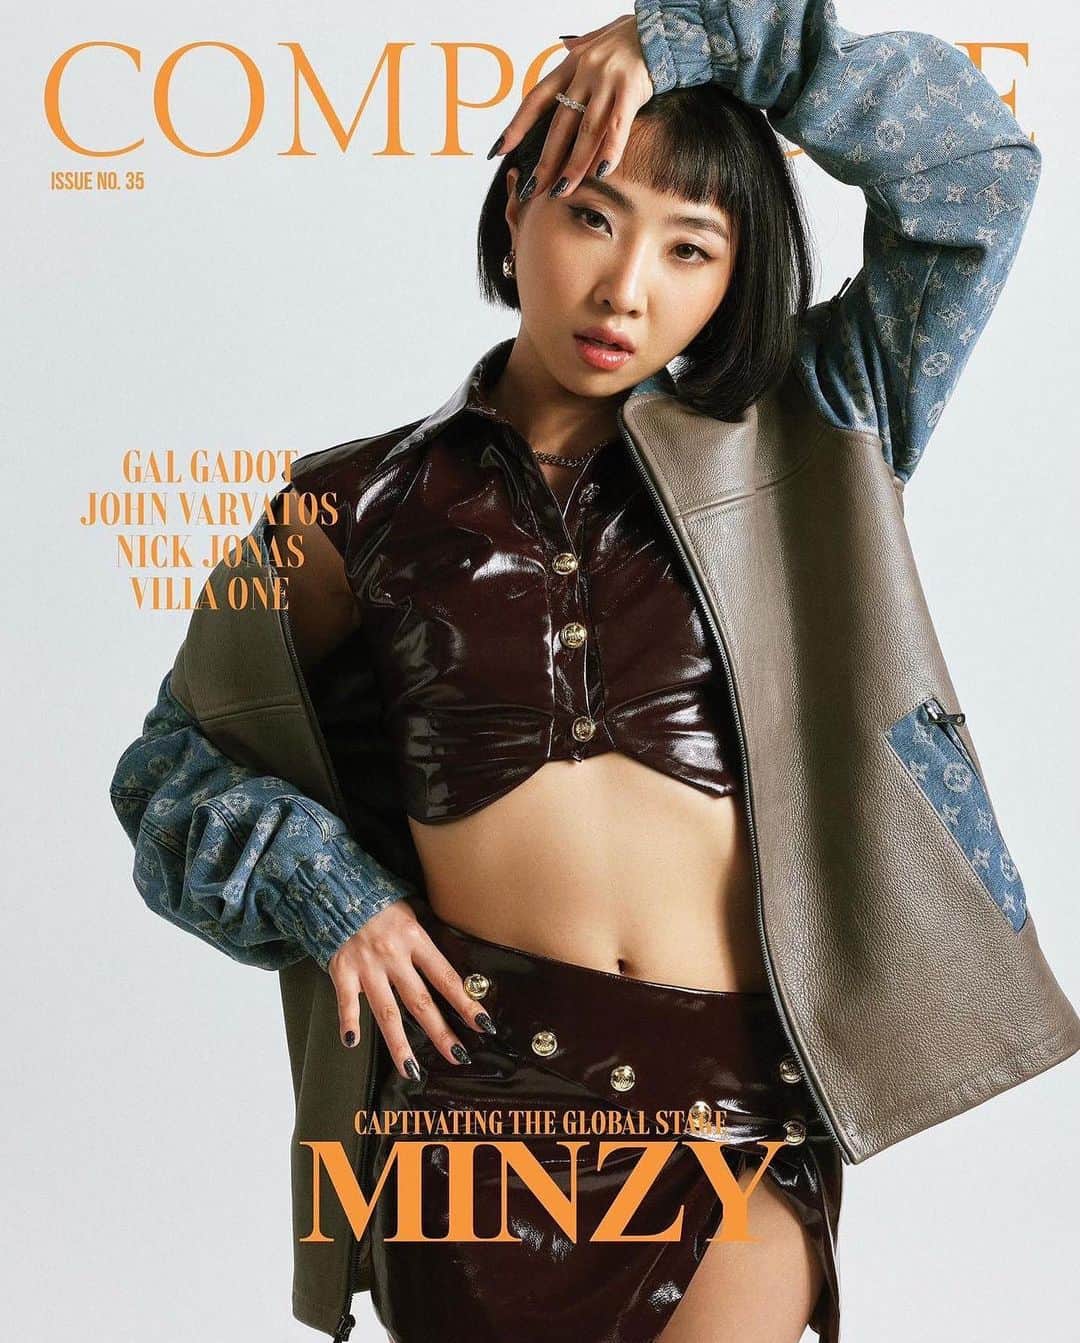 Yukiのインスタグラム：「IT’S FINALLY OUT!!! 😭 Issue 35 of @composure.mag featuring the beautiful @_minzy_mz 💖   Huge thank you to the entire team and for trusting me to creative direct! I am so honored and grateful for this amazing experience 🙏🏼🙏🏼🙏🏼   Swipe for some BTS and for a glimpse of my serious work face 😂   Cover team:  Photo @randytran.photography  Video @brannon_gee for @agency__cm  Creative Director @yukibomb  Stylist @sky_is_dlimit  MUA @archangelachelsea  Hair @hairbyyuichi  Photo Assist @dorianqd  Photo Retoucher @anhlene  Location @theheights.la  Production @agency__cm   Cover look @louisvuitton x @supremenewyork x @helenanthonyofficial   #minzy #minzy2ne1 #2ne1 #2ne1minzy #kpop #kpopqueen #kpopqueens #composuremagazine #magazinecover  #bts」